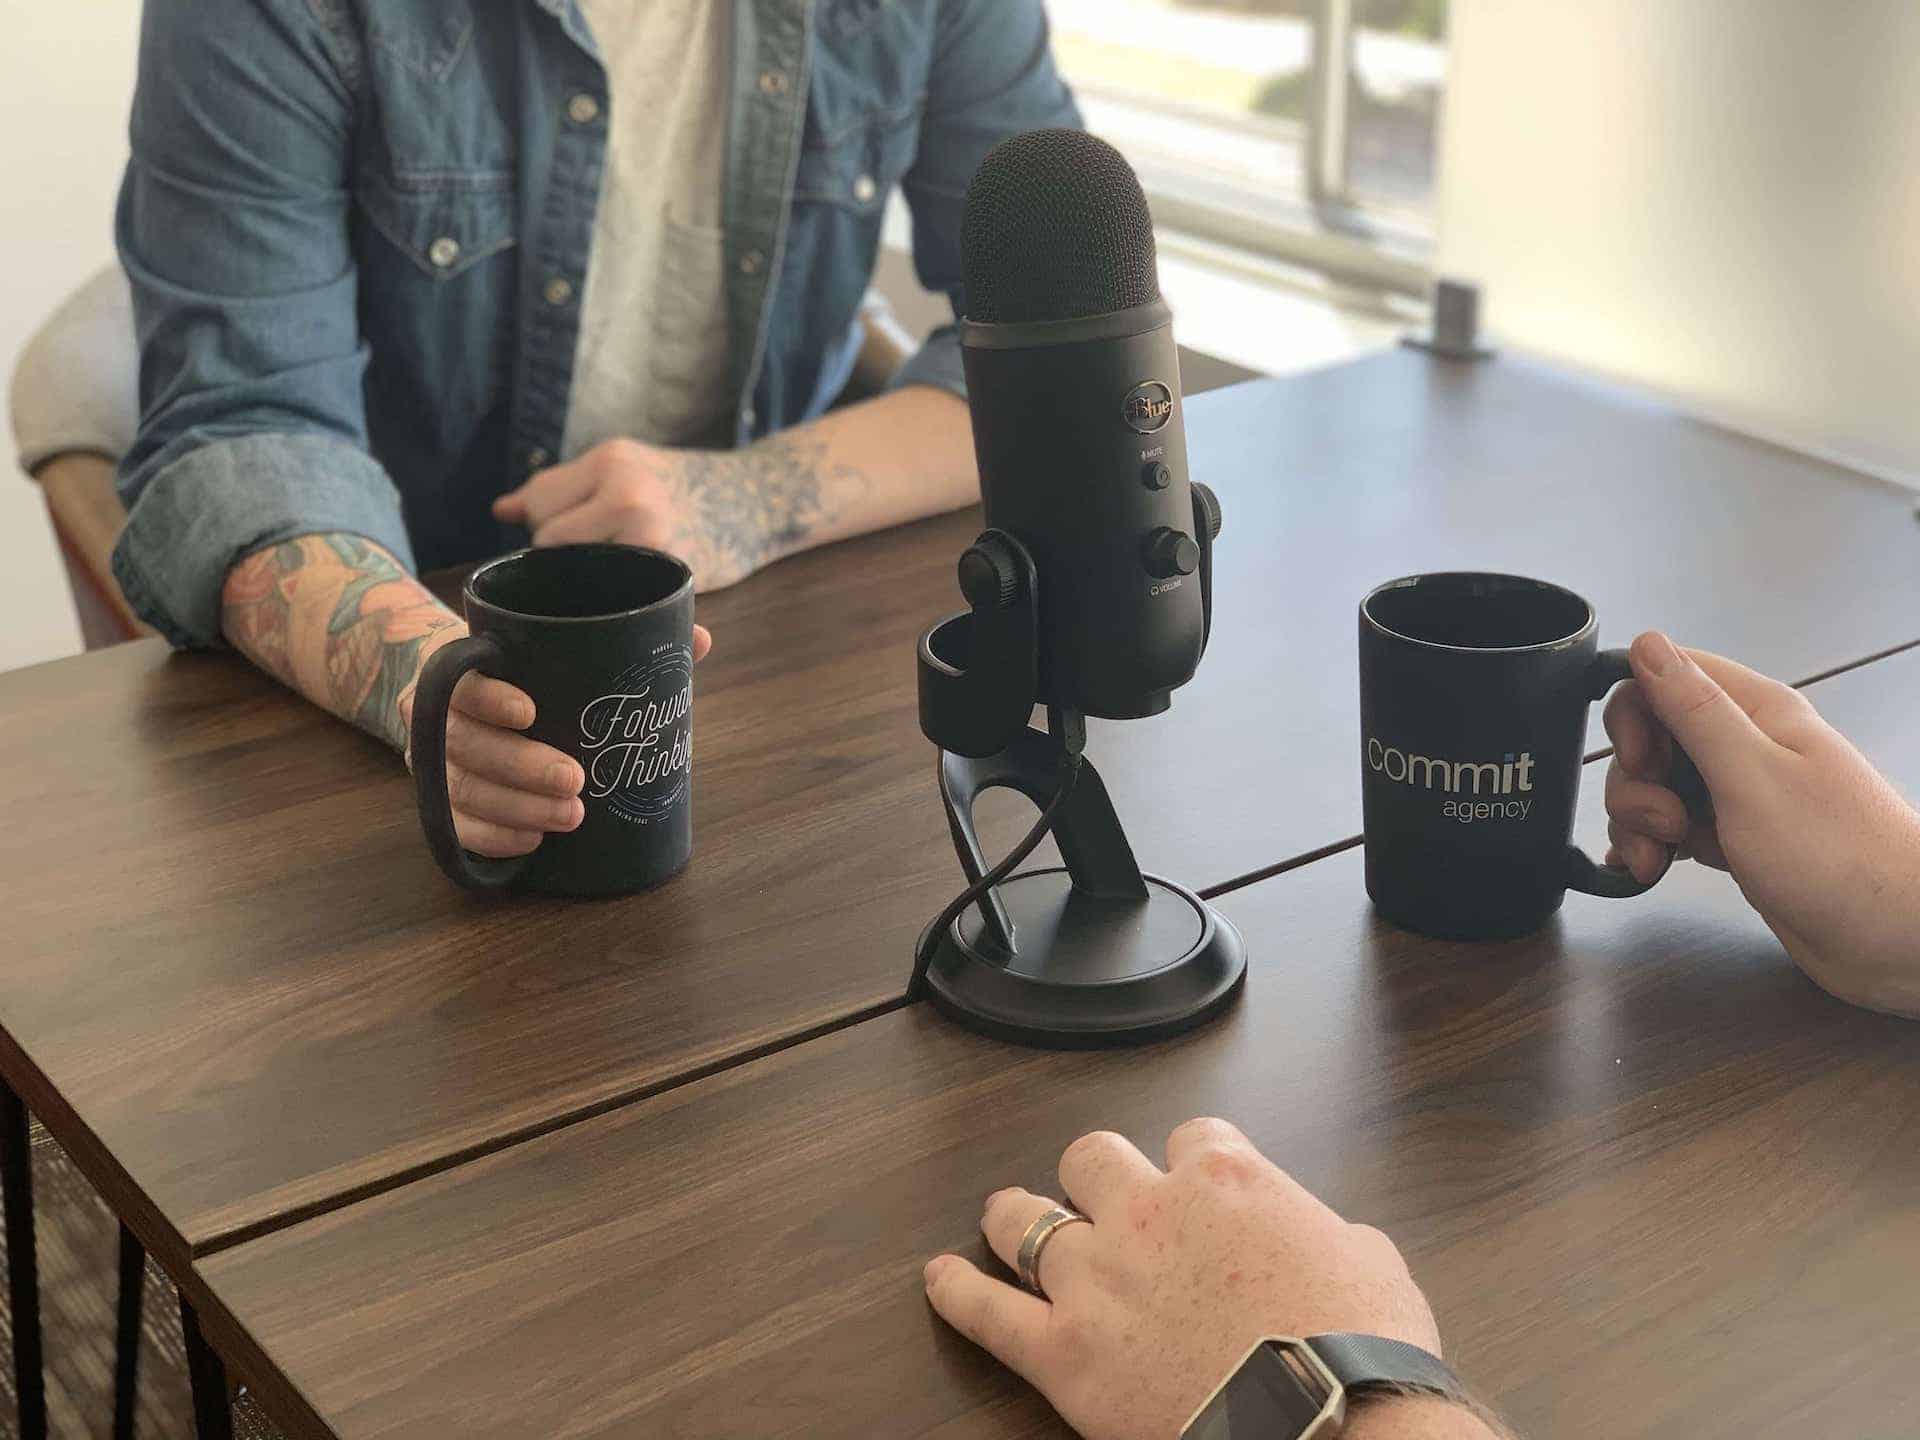 Beginner's Guide: How to Start a Podcast | Blog | Commit Agency